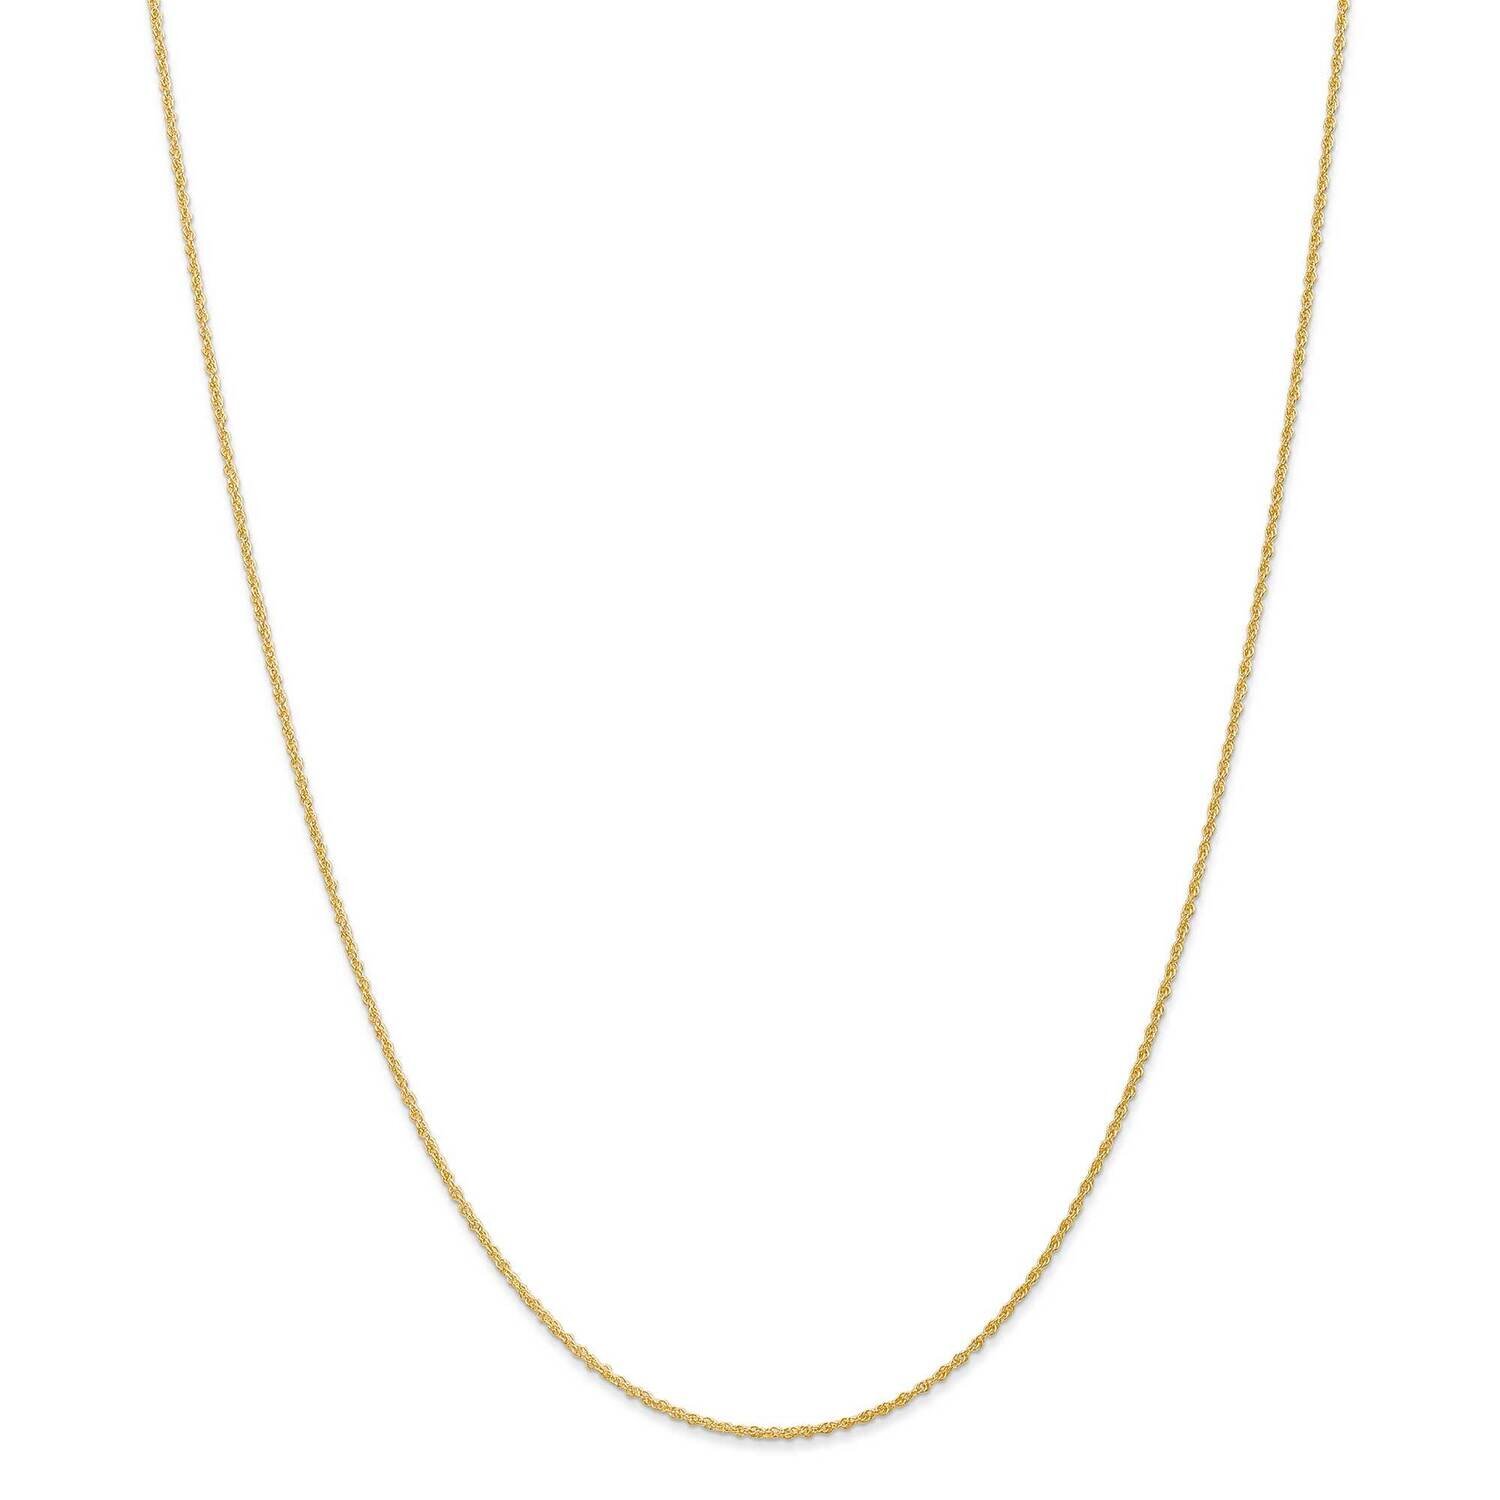 1.1mm Baby Rope Chain 14 Inch 14k Gold PEN173-14